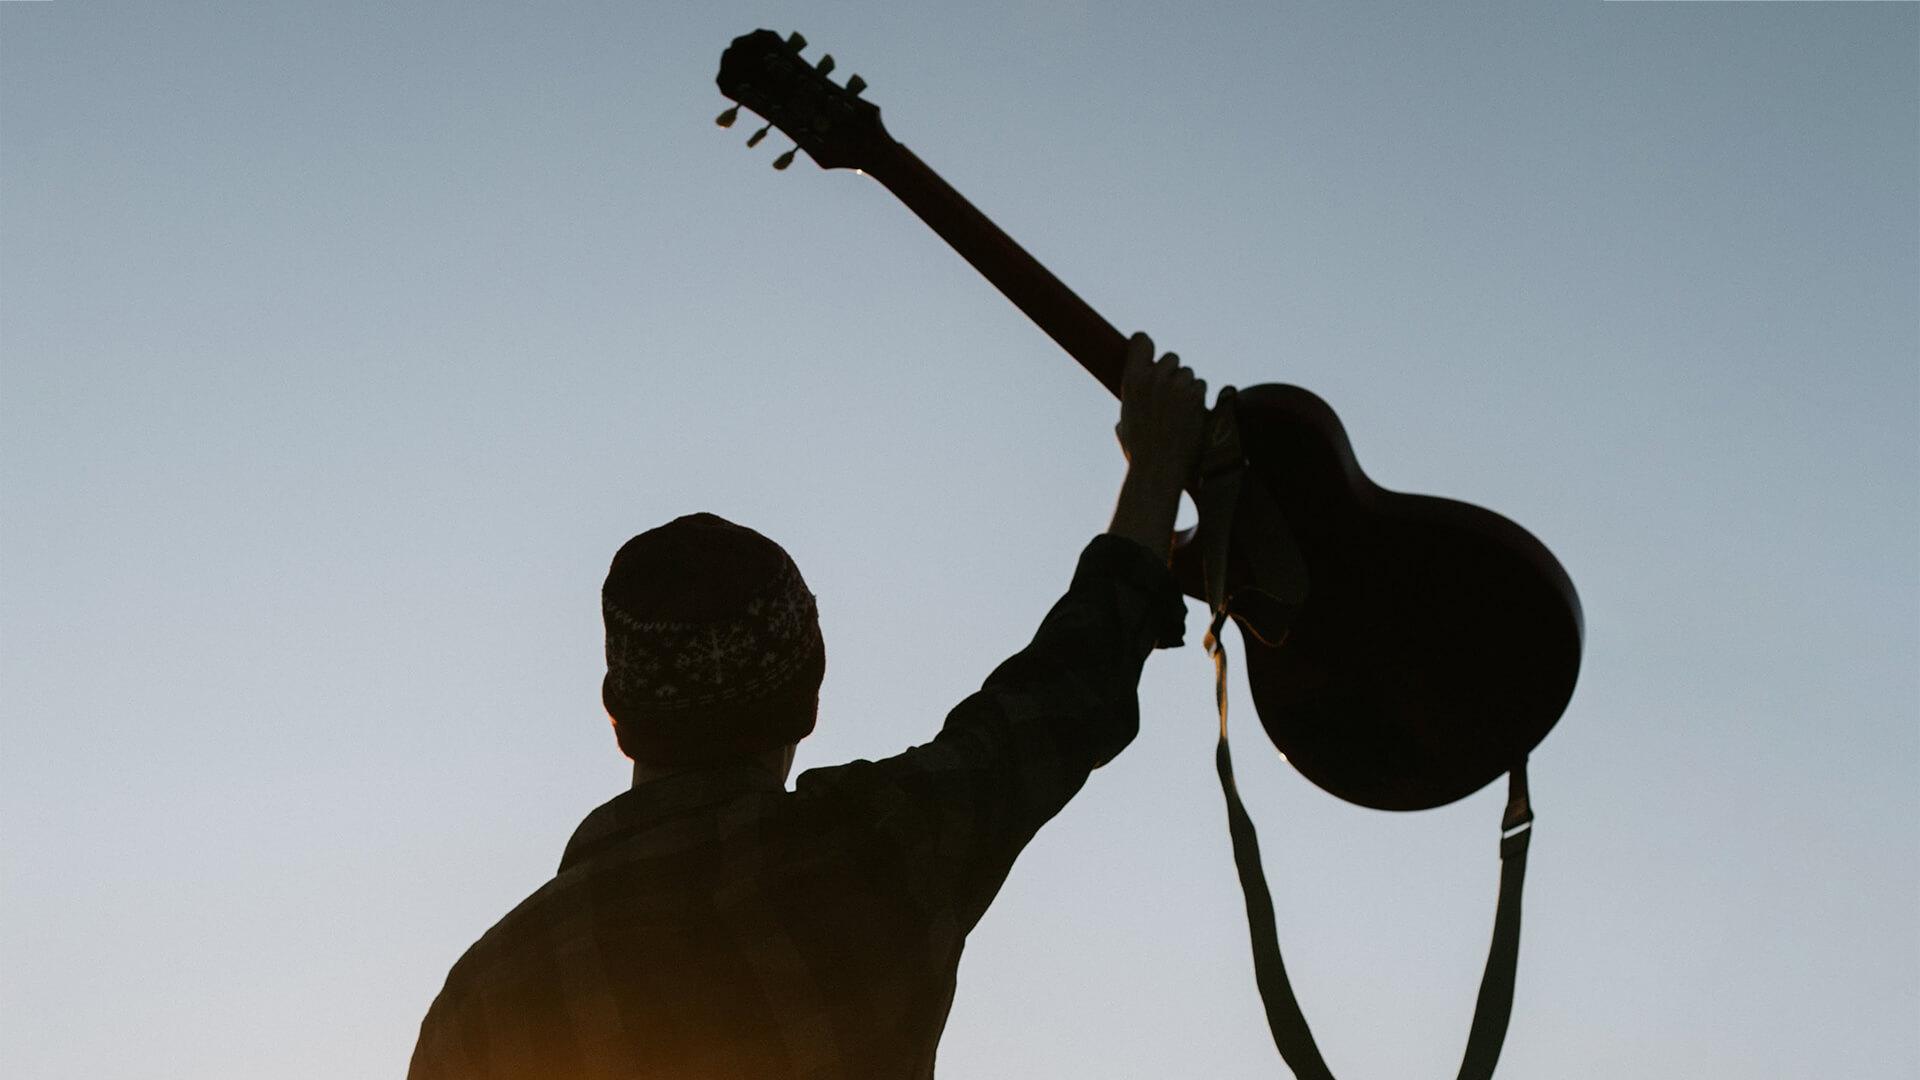 silhouette of man holding guitar